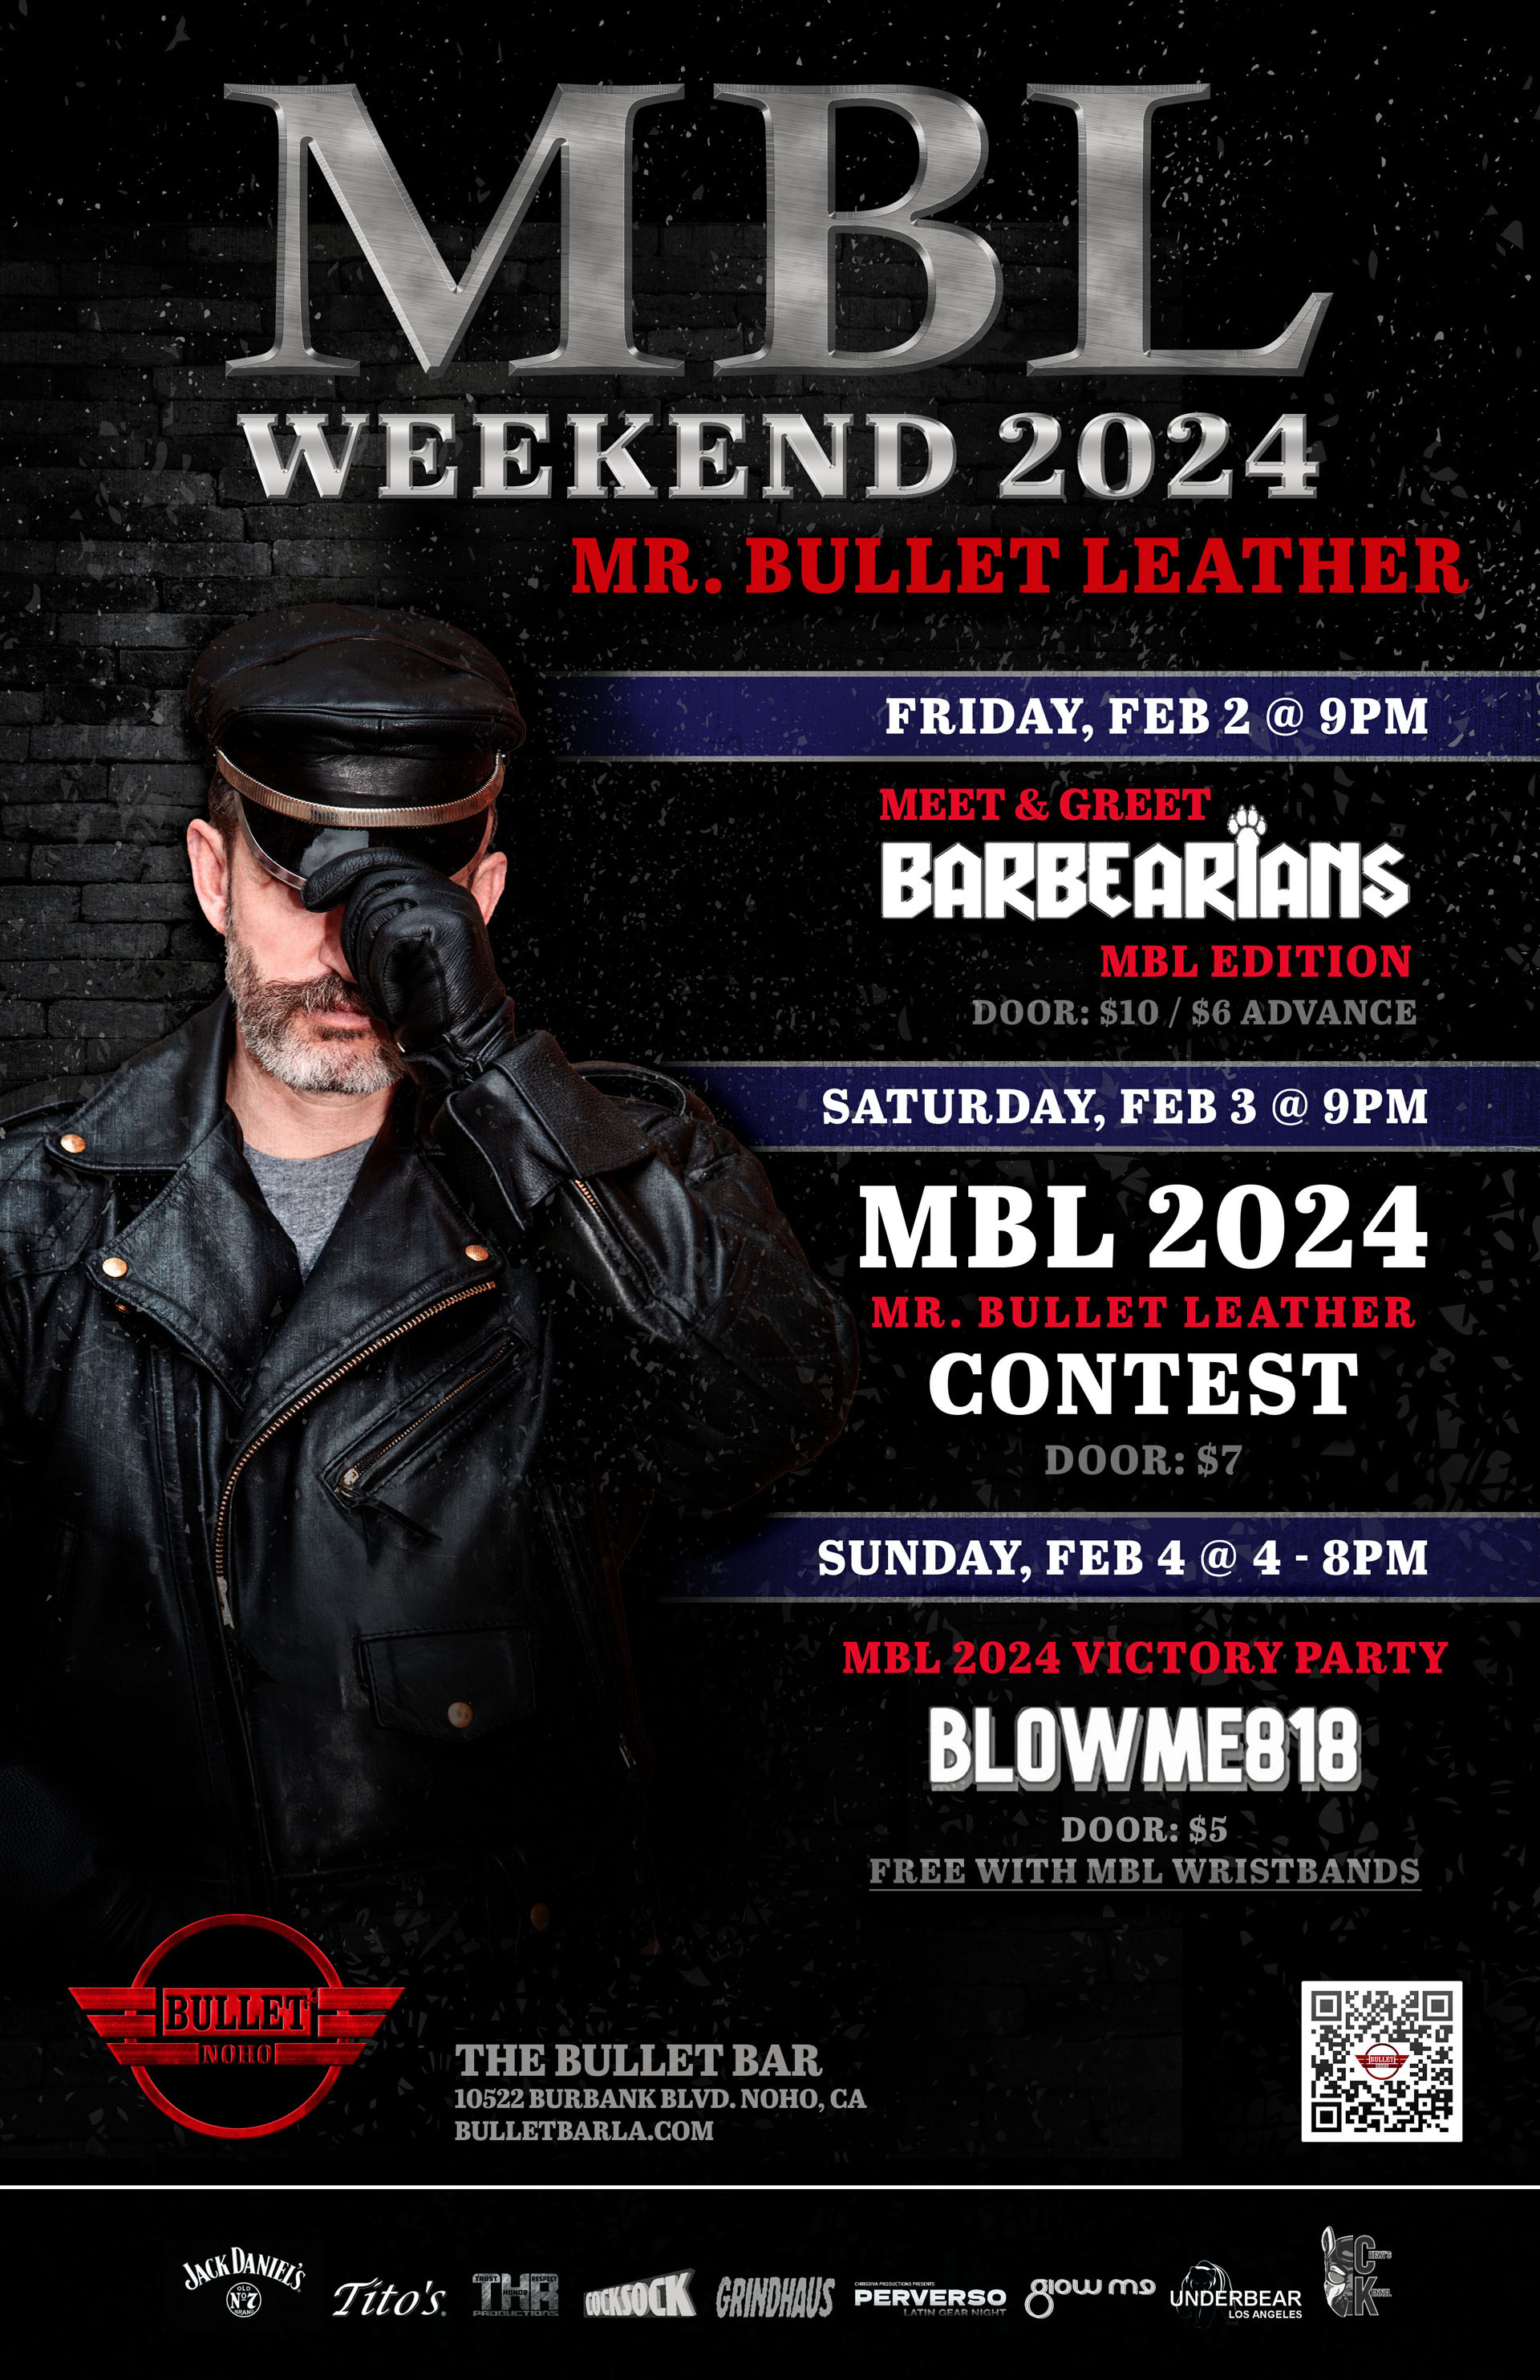 THE BULLET BAR Presents MR. BULLET LEATHER 2024: Saturday, 02/03/24 at 9:00 PM.  $7 Door Cover.